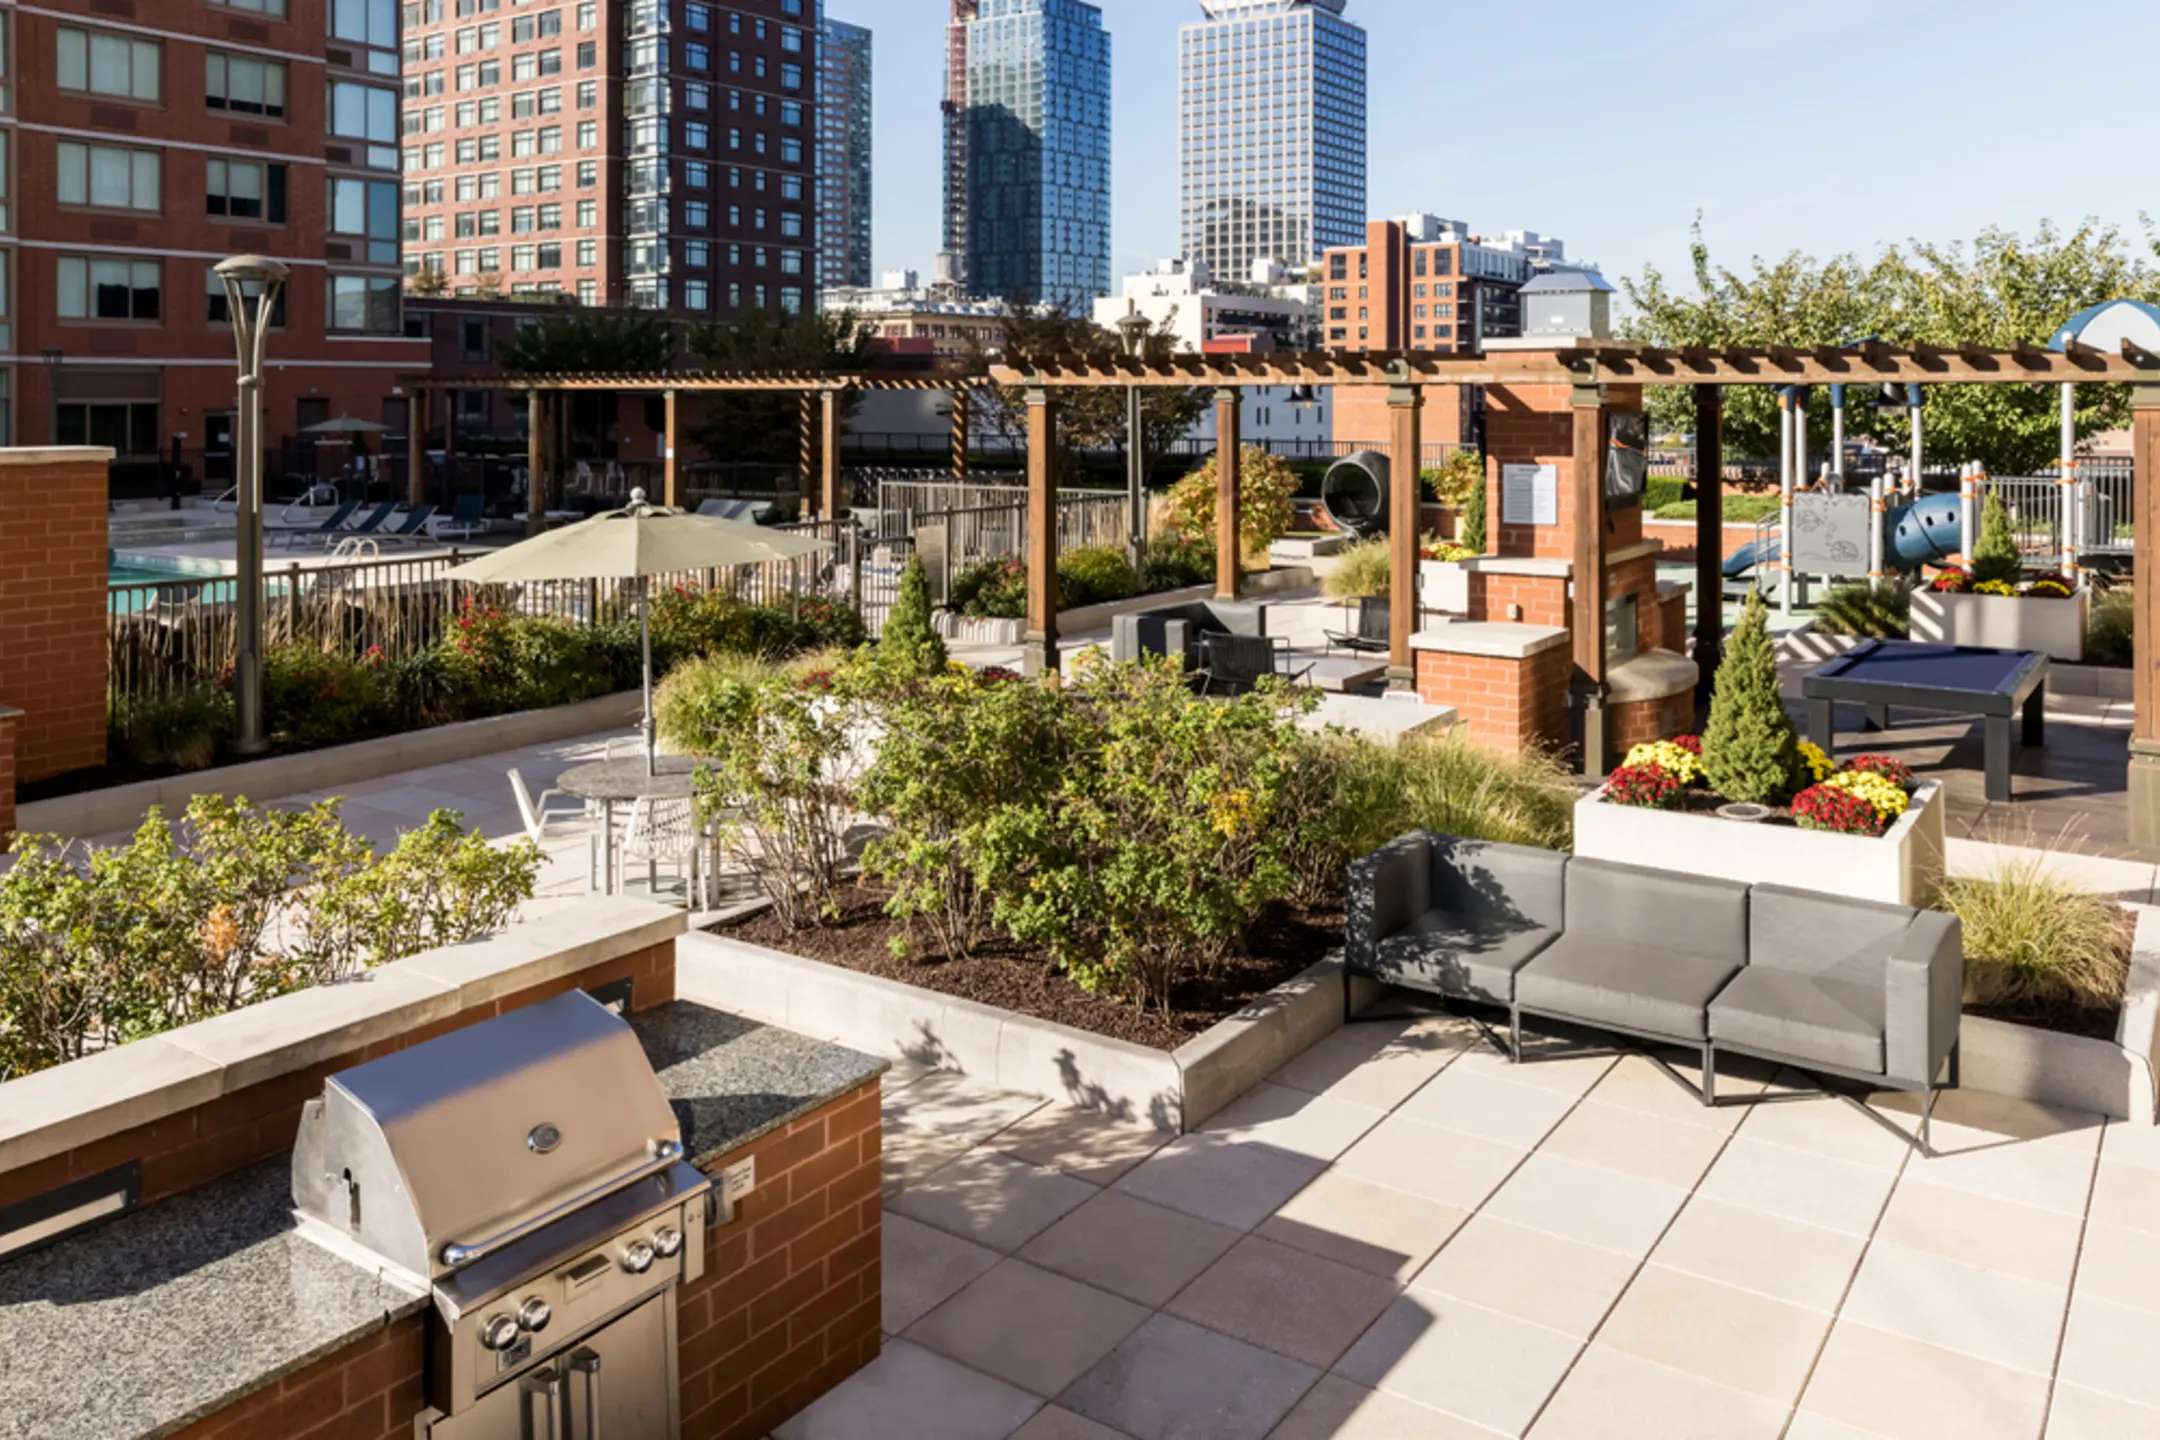 Patio / Deck - The BLVD Collection - Jersey City, NJ